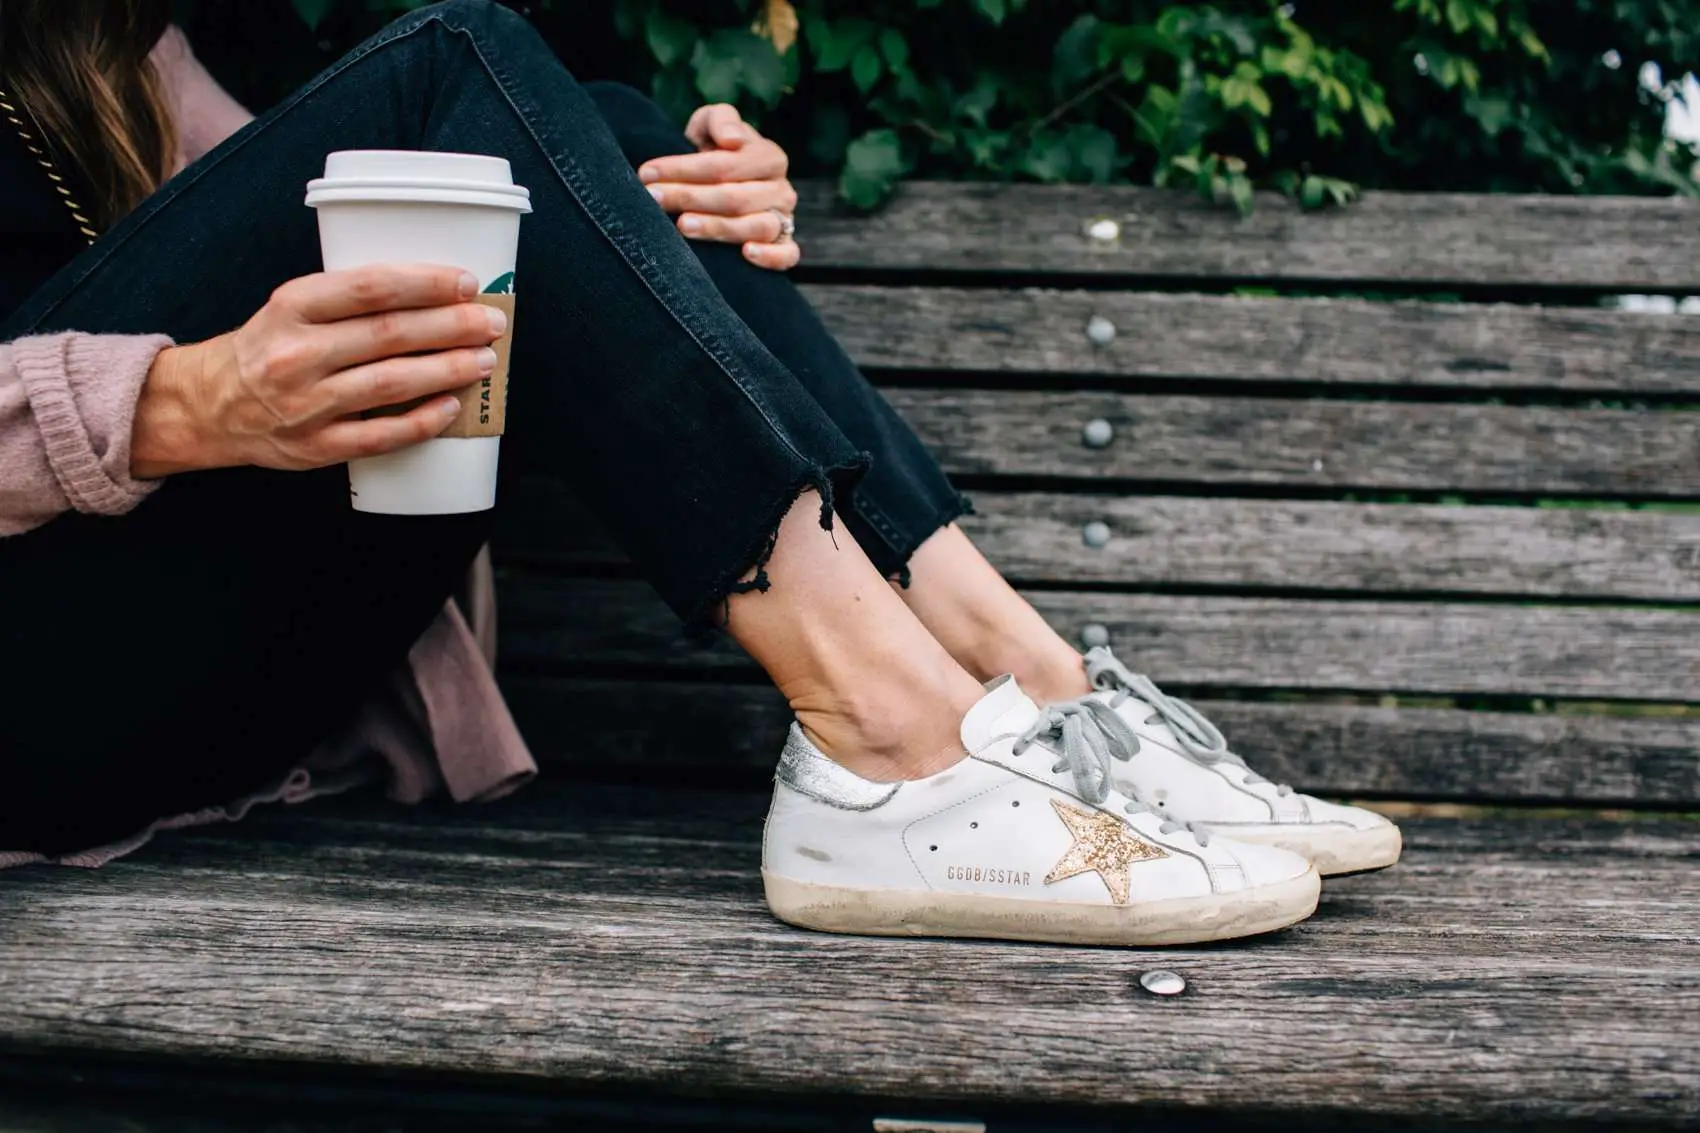 Golden Goose Sneaker Review + Where to Buy Them â Hello ...